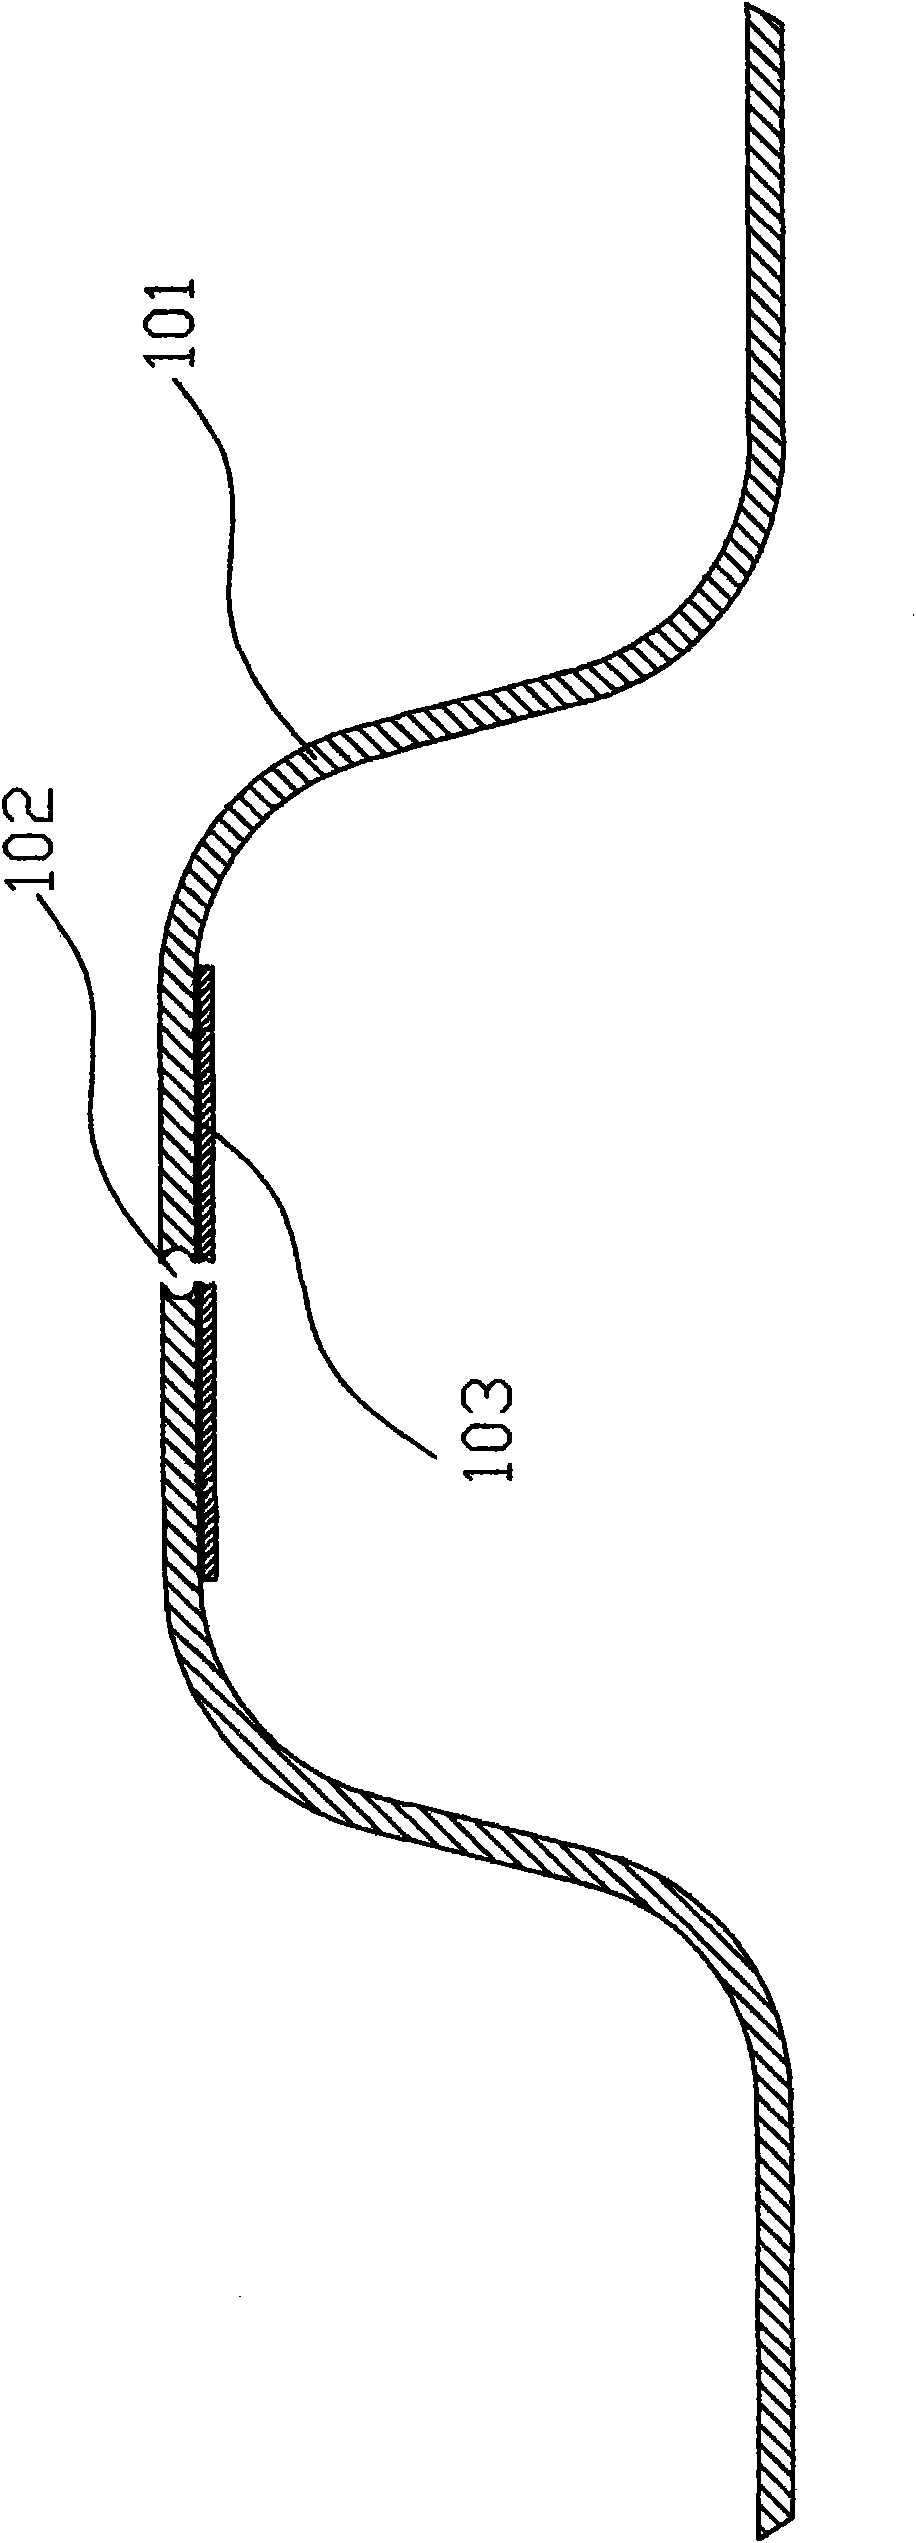 Film with bulge for computer keyboard or flexible printed circuit and bulge forming process thereof